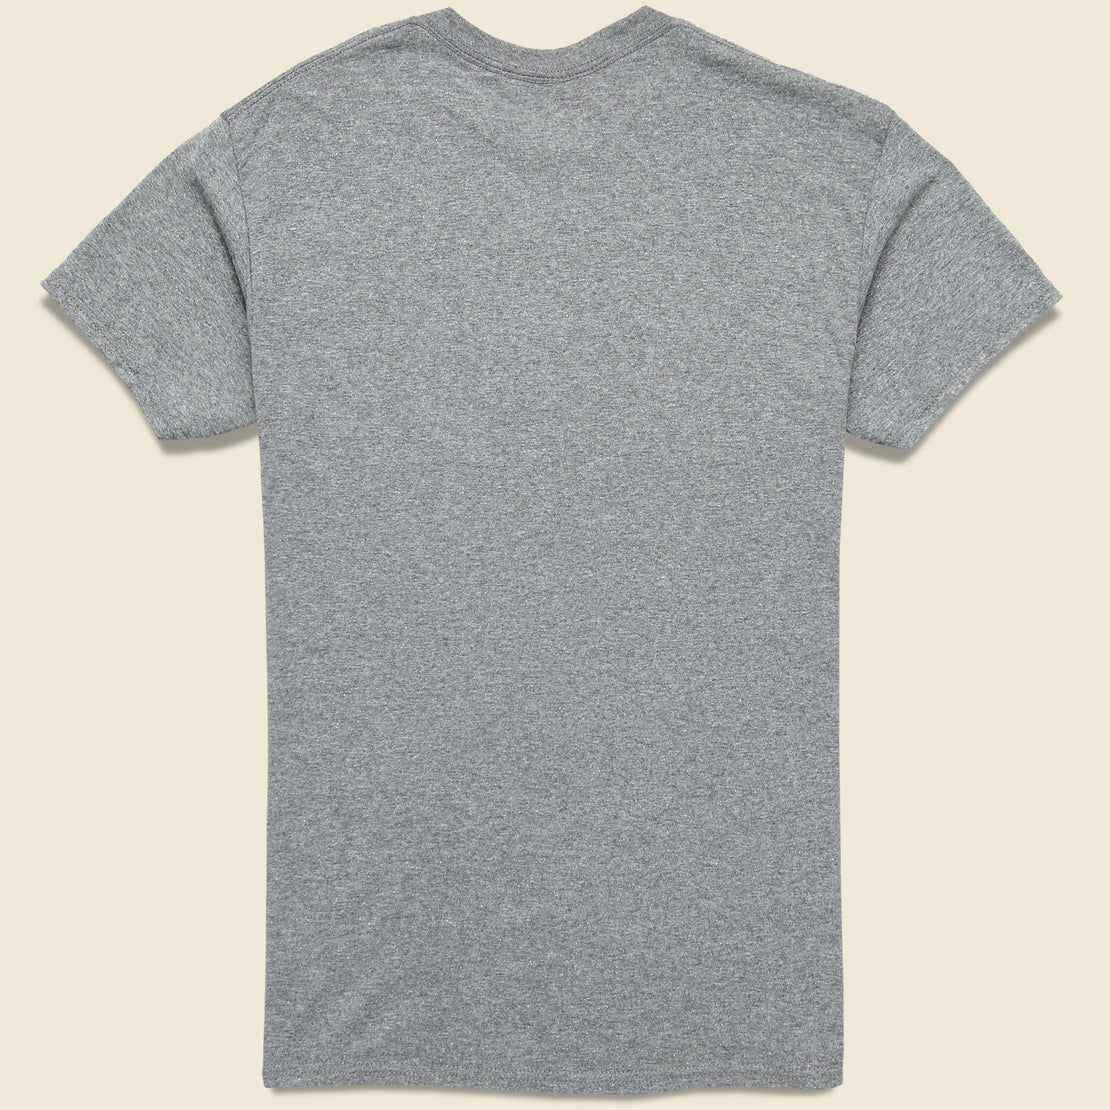 Mushrooms Tee - Heather Grey - STAG - STAG Provisions - Tops - S/S Tee